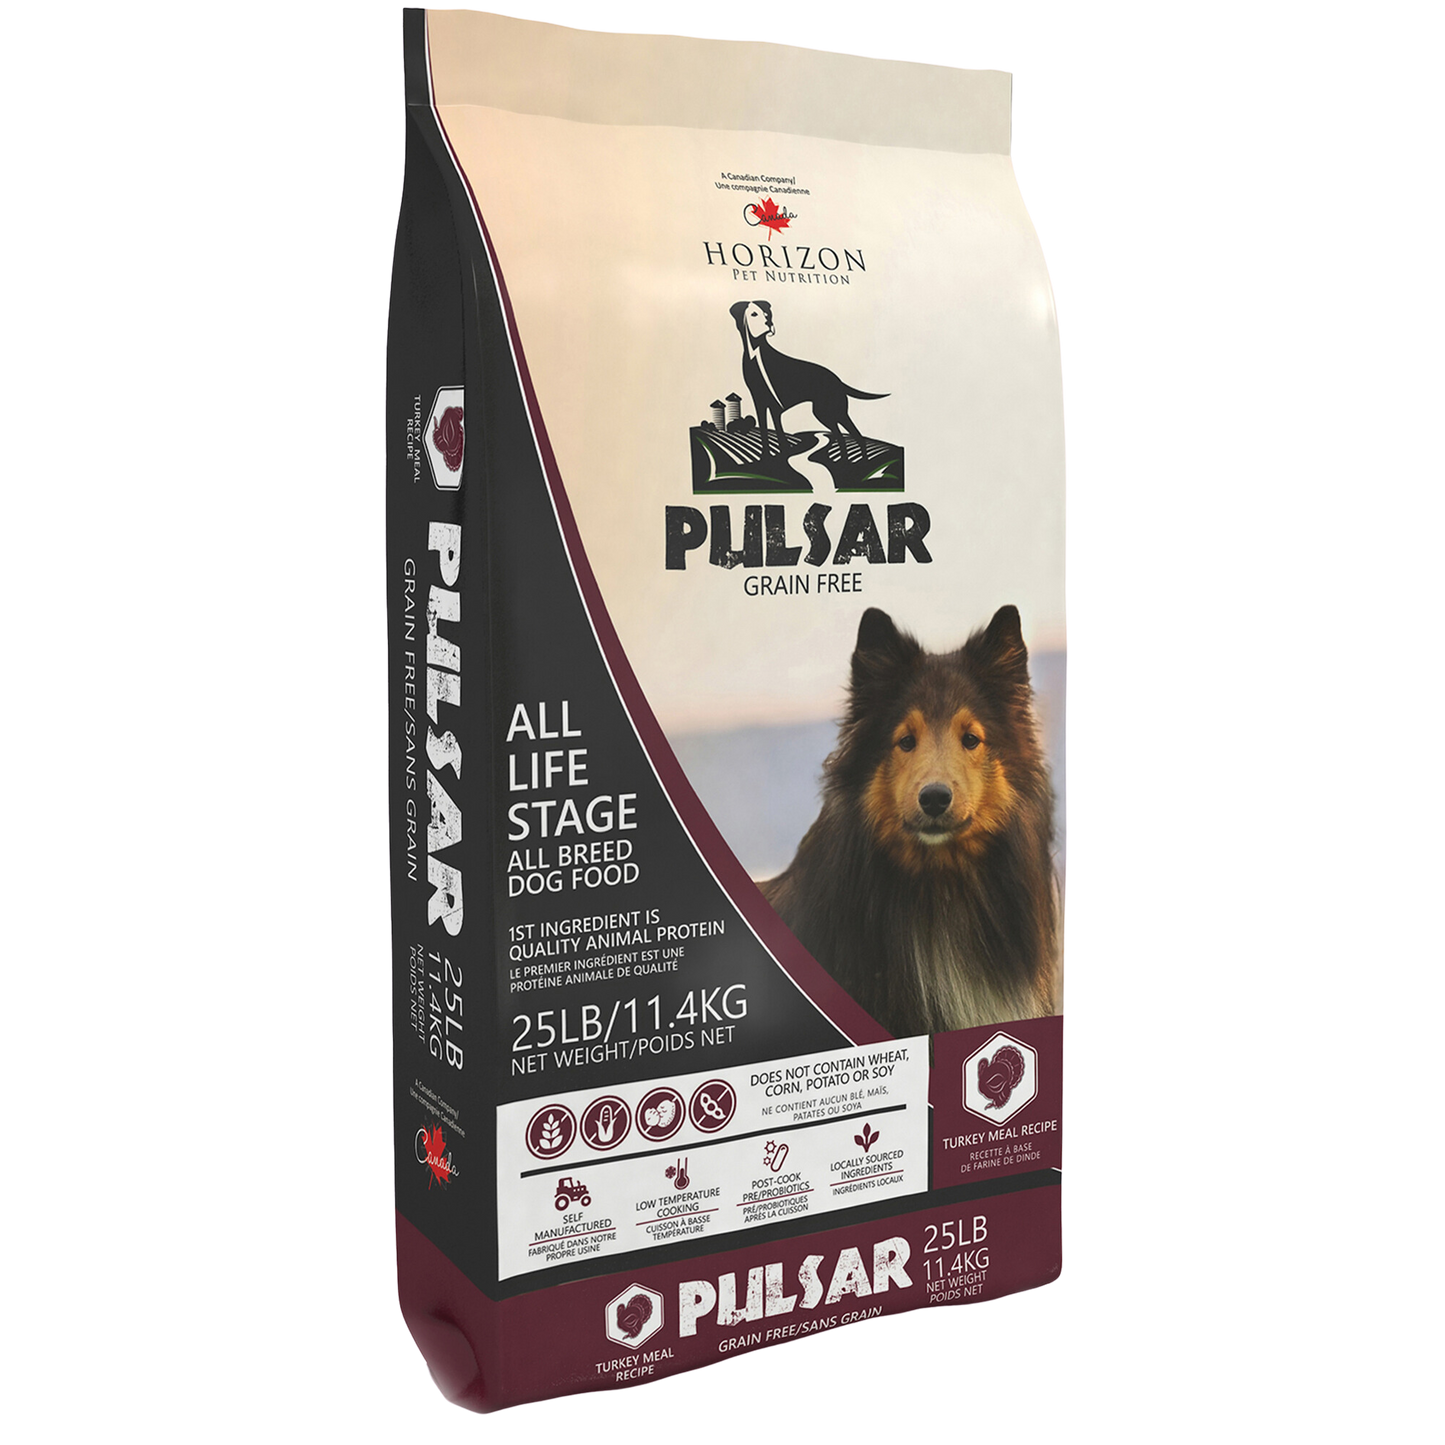 Pulsar All Life Stage, All Breed Dog Food, Grain-Free, Turkey Meal Recipe